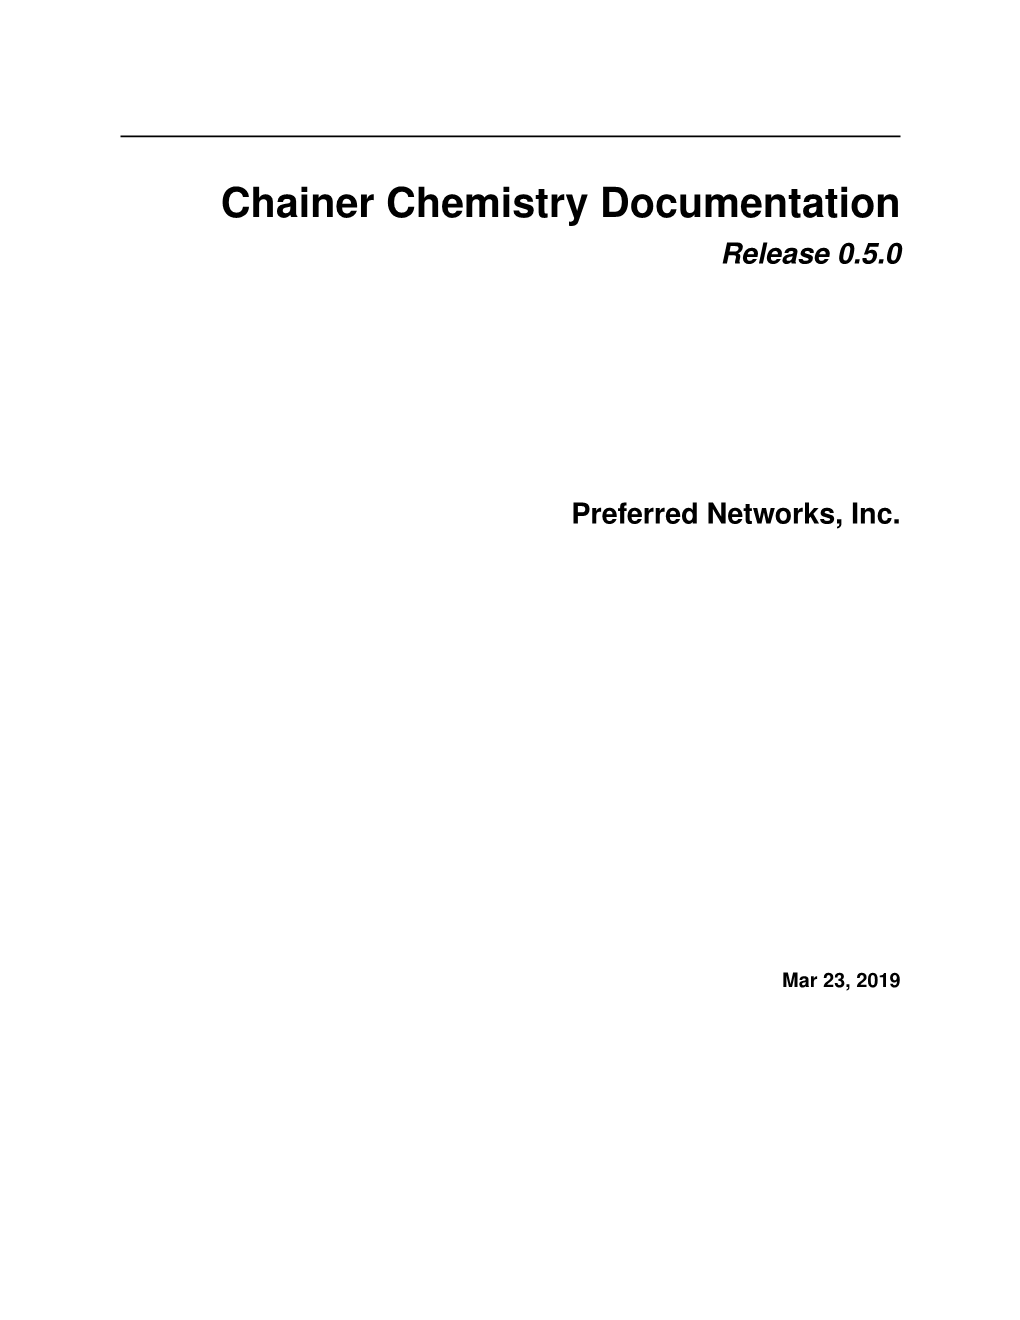 Chainer Chemistry Documentation Release 0.5.0